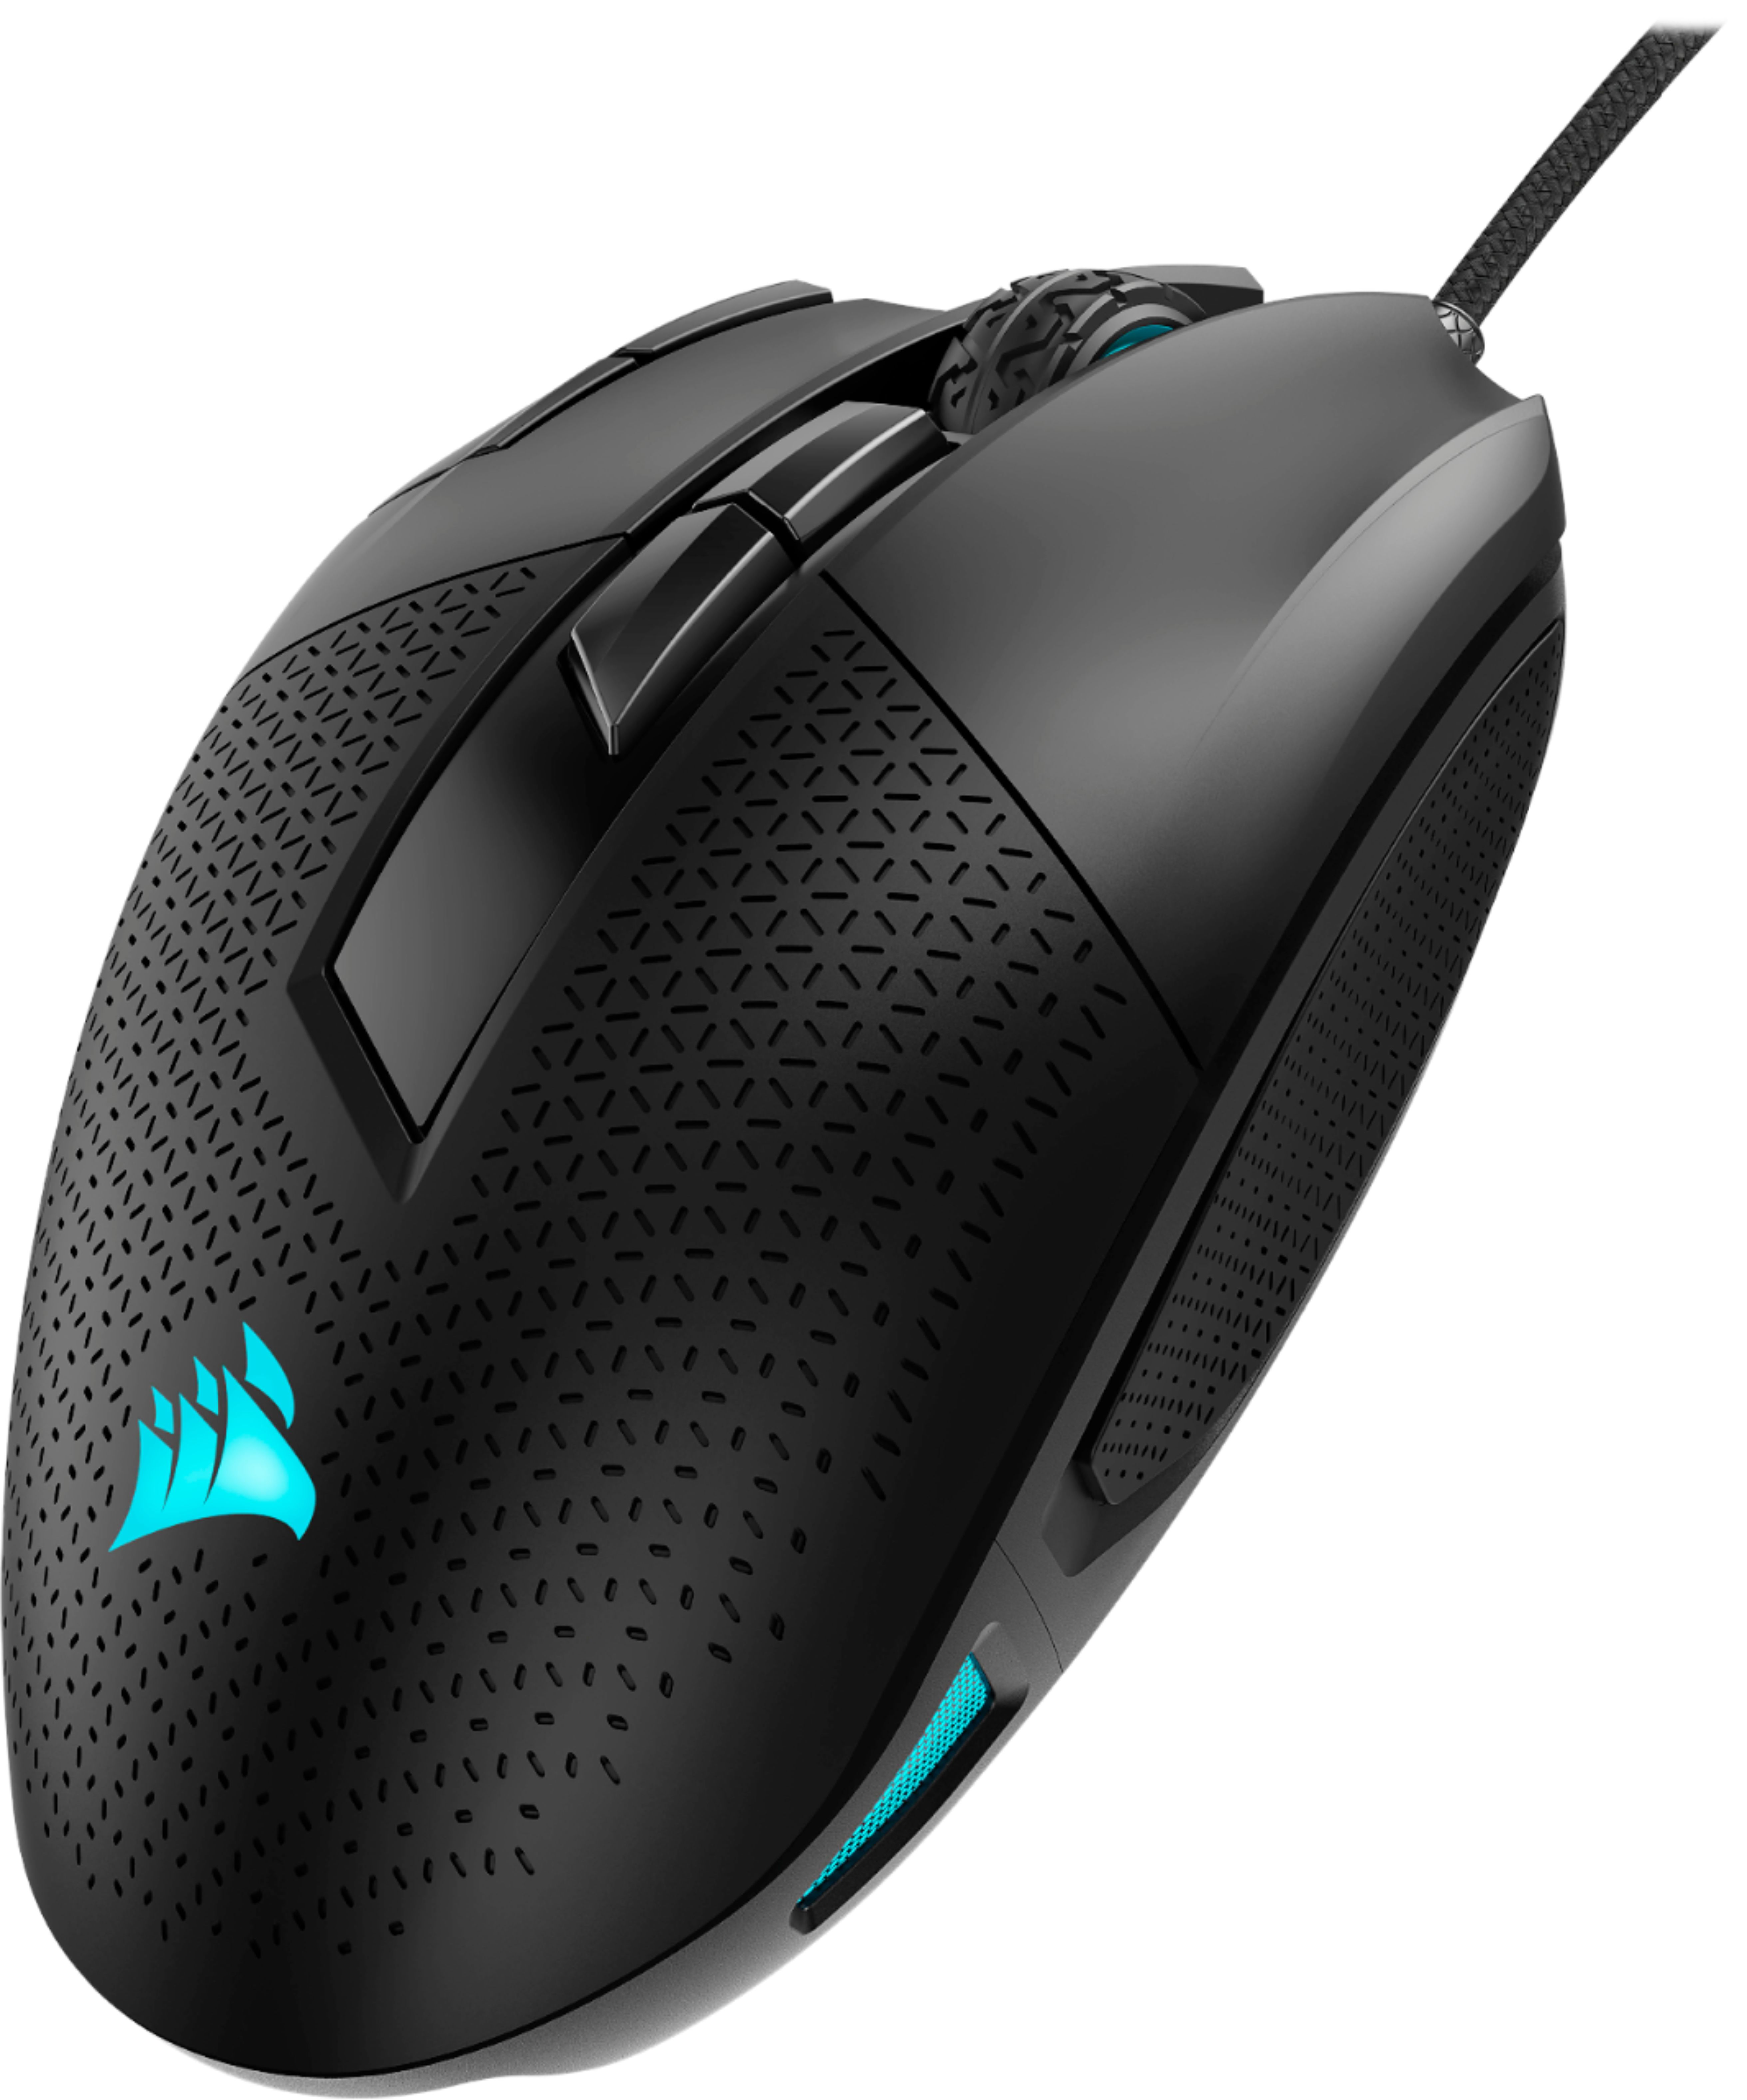 Corsair Nightsabre Wireless review: versatile and precise gaming mouse